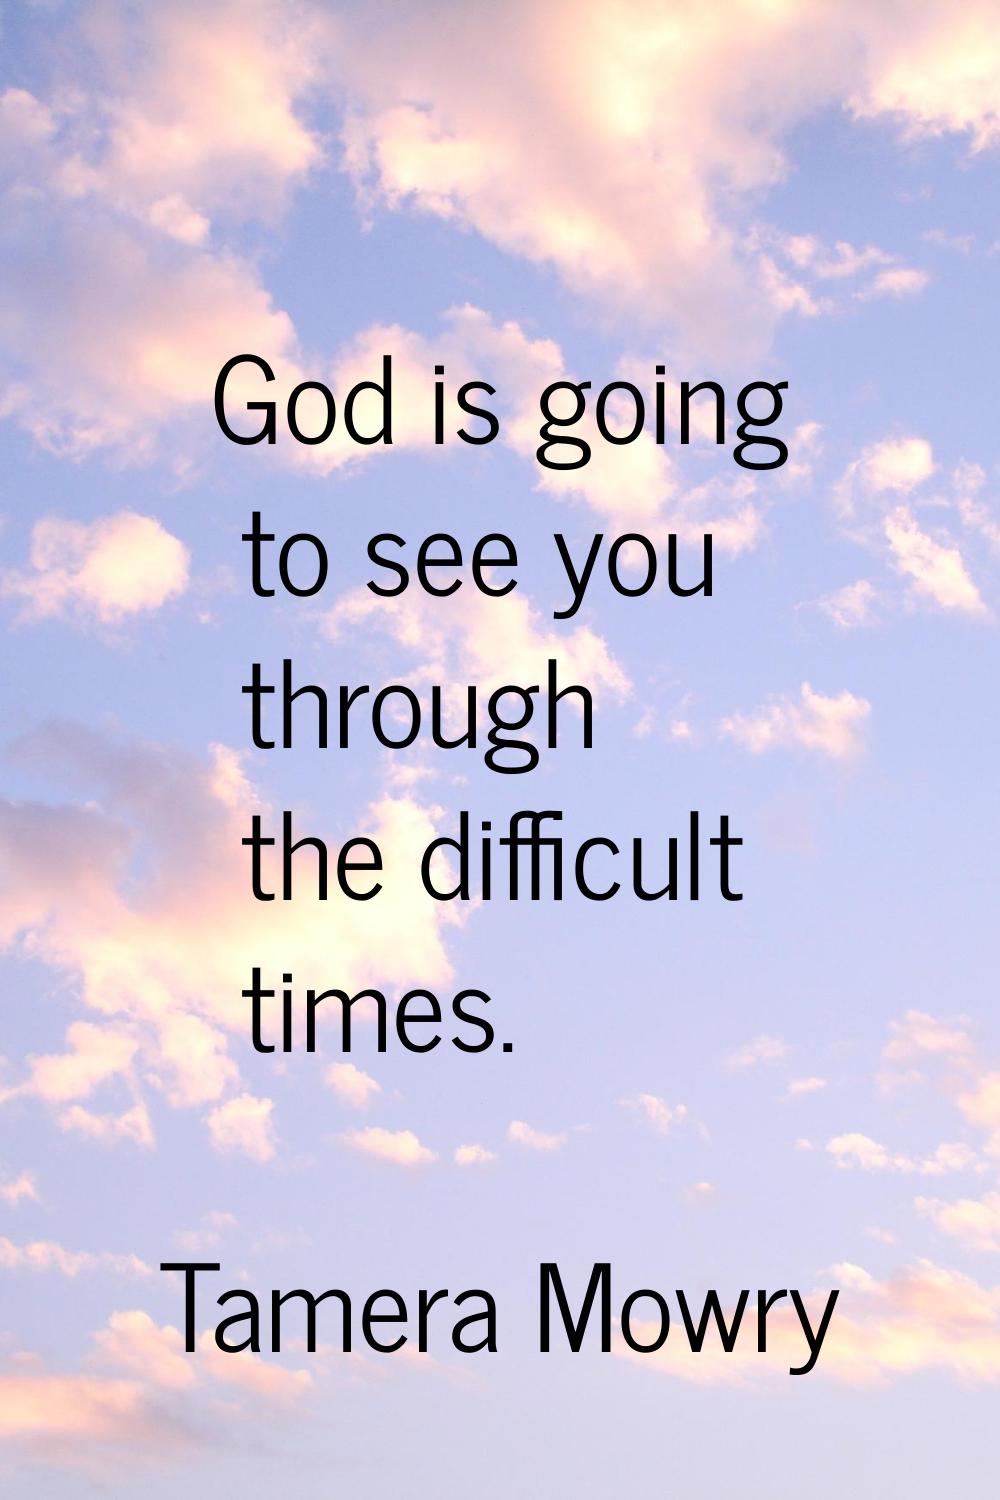 God is going to see you through the difficult times.